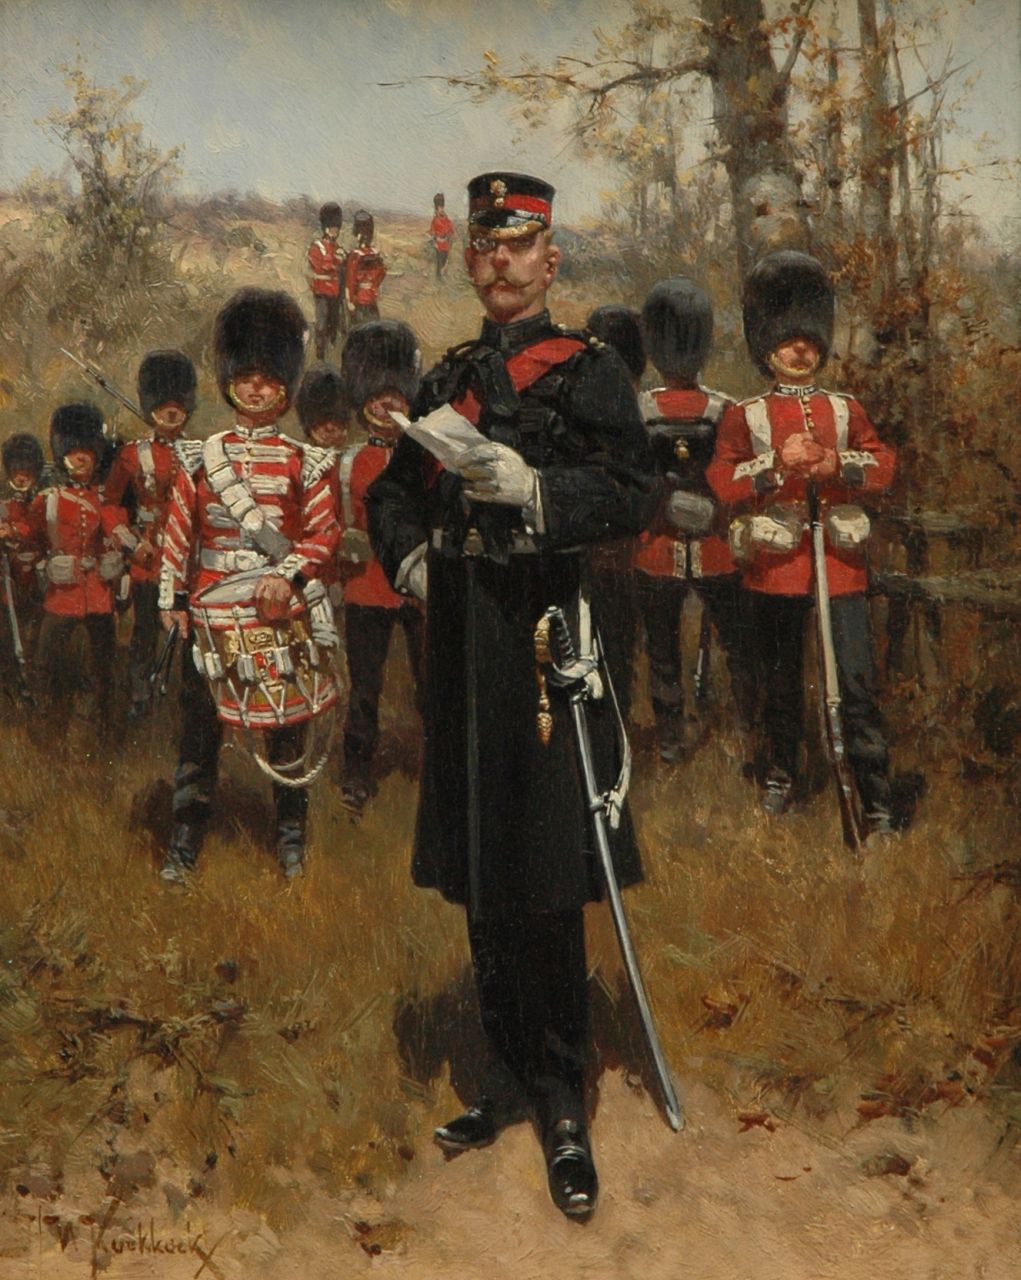 Koekkoek H.W.  | Hermanus Willem Koekkoek | Paintings offered for sale | The Grenadier Guards of the British army, oil on panel 27.0 x 21.2 cm, signed l.l. and painted ca. 1898